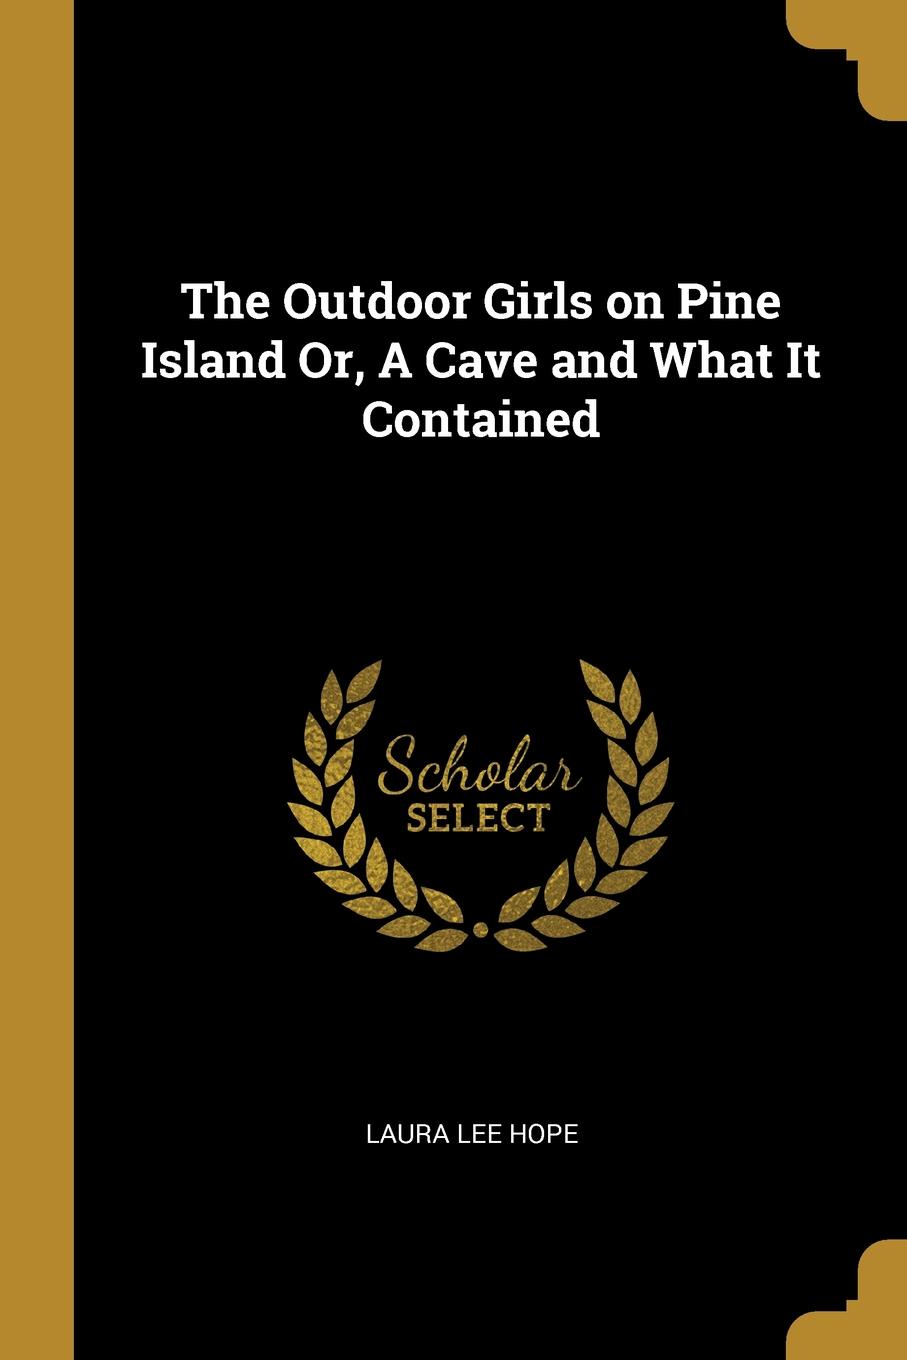 The Outdoor Girls on Pine Island Or, A Cave and What It Contained